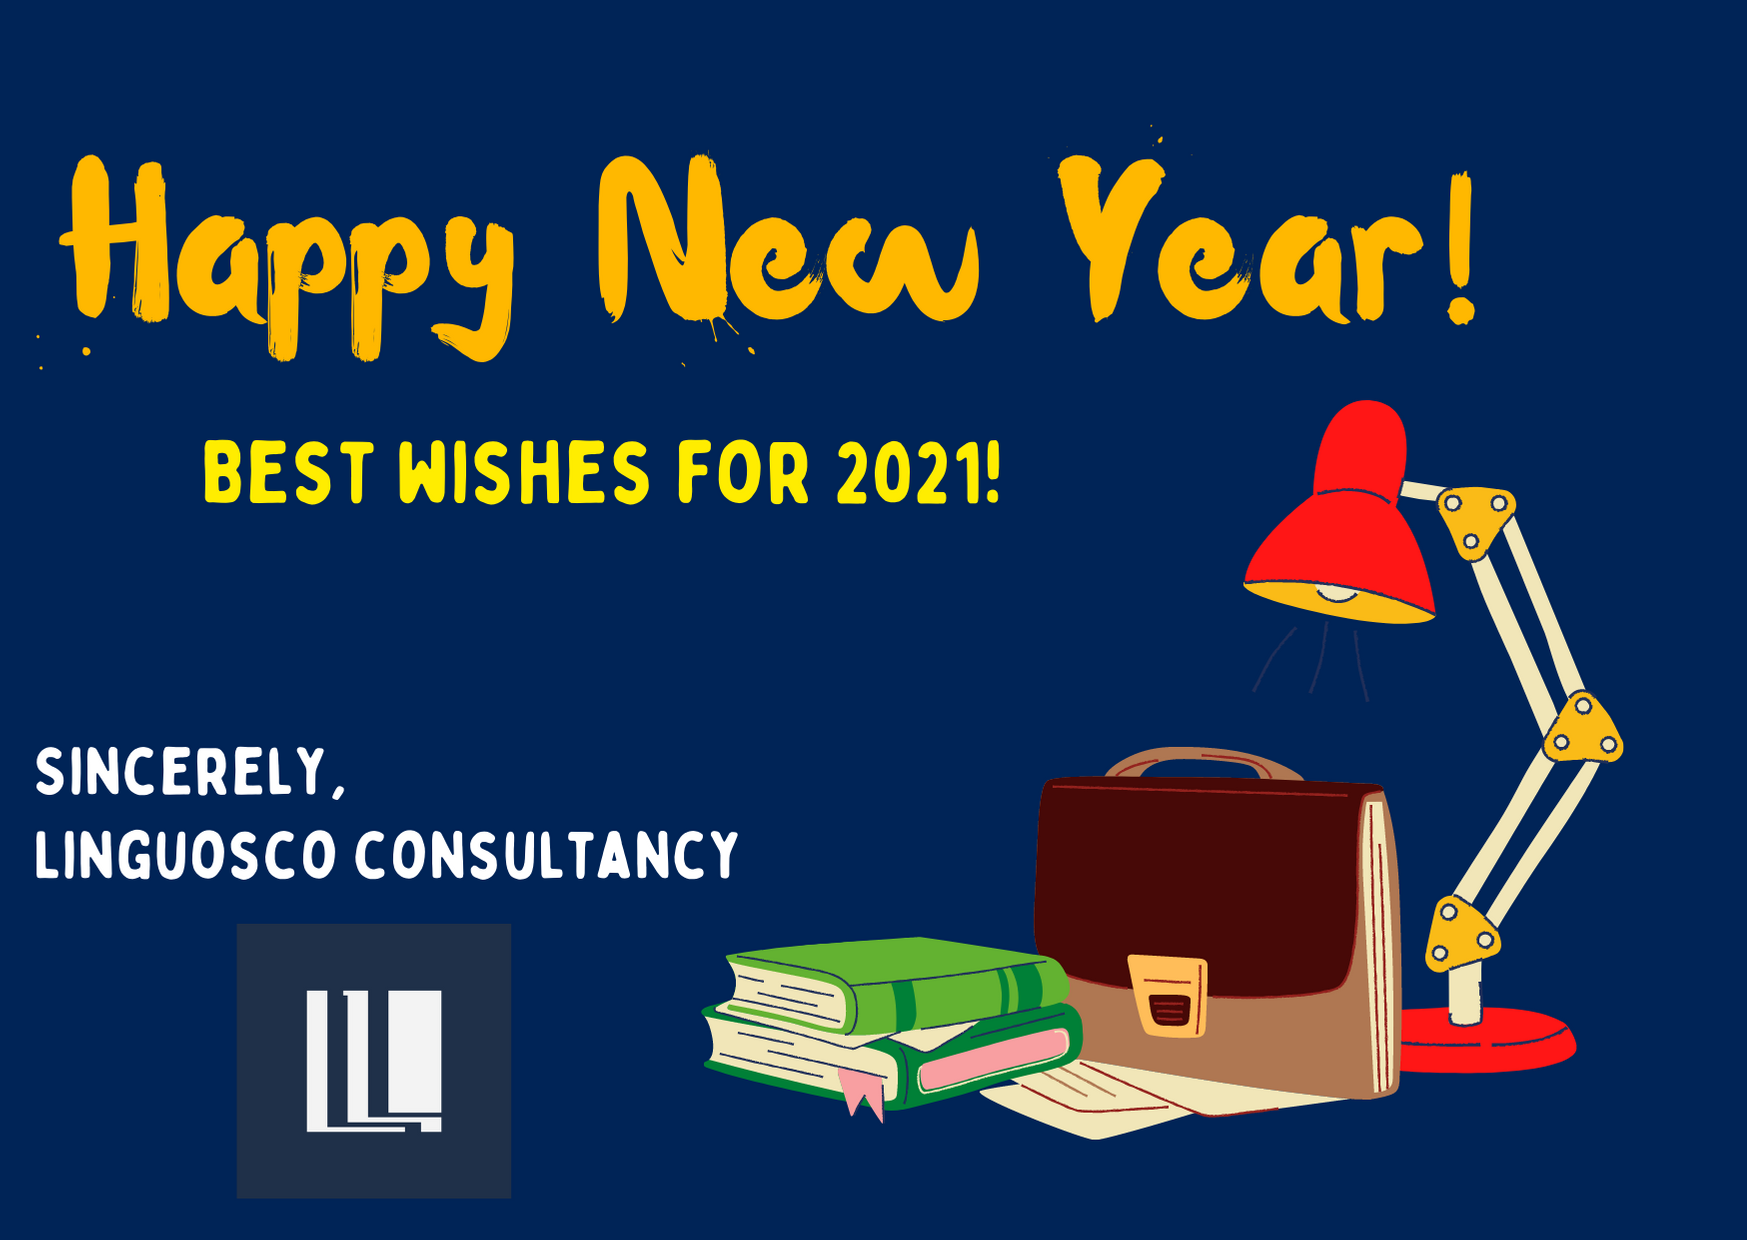 Best Wishes for 2021!